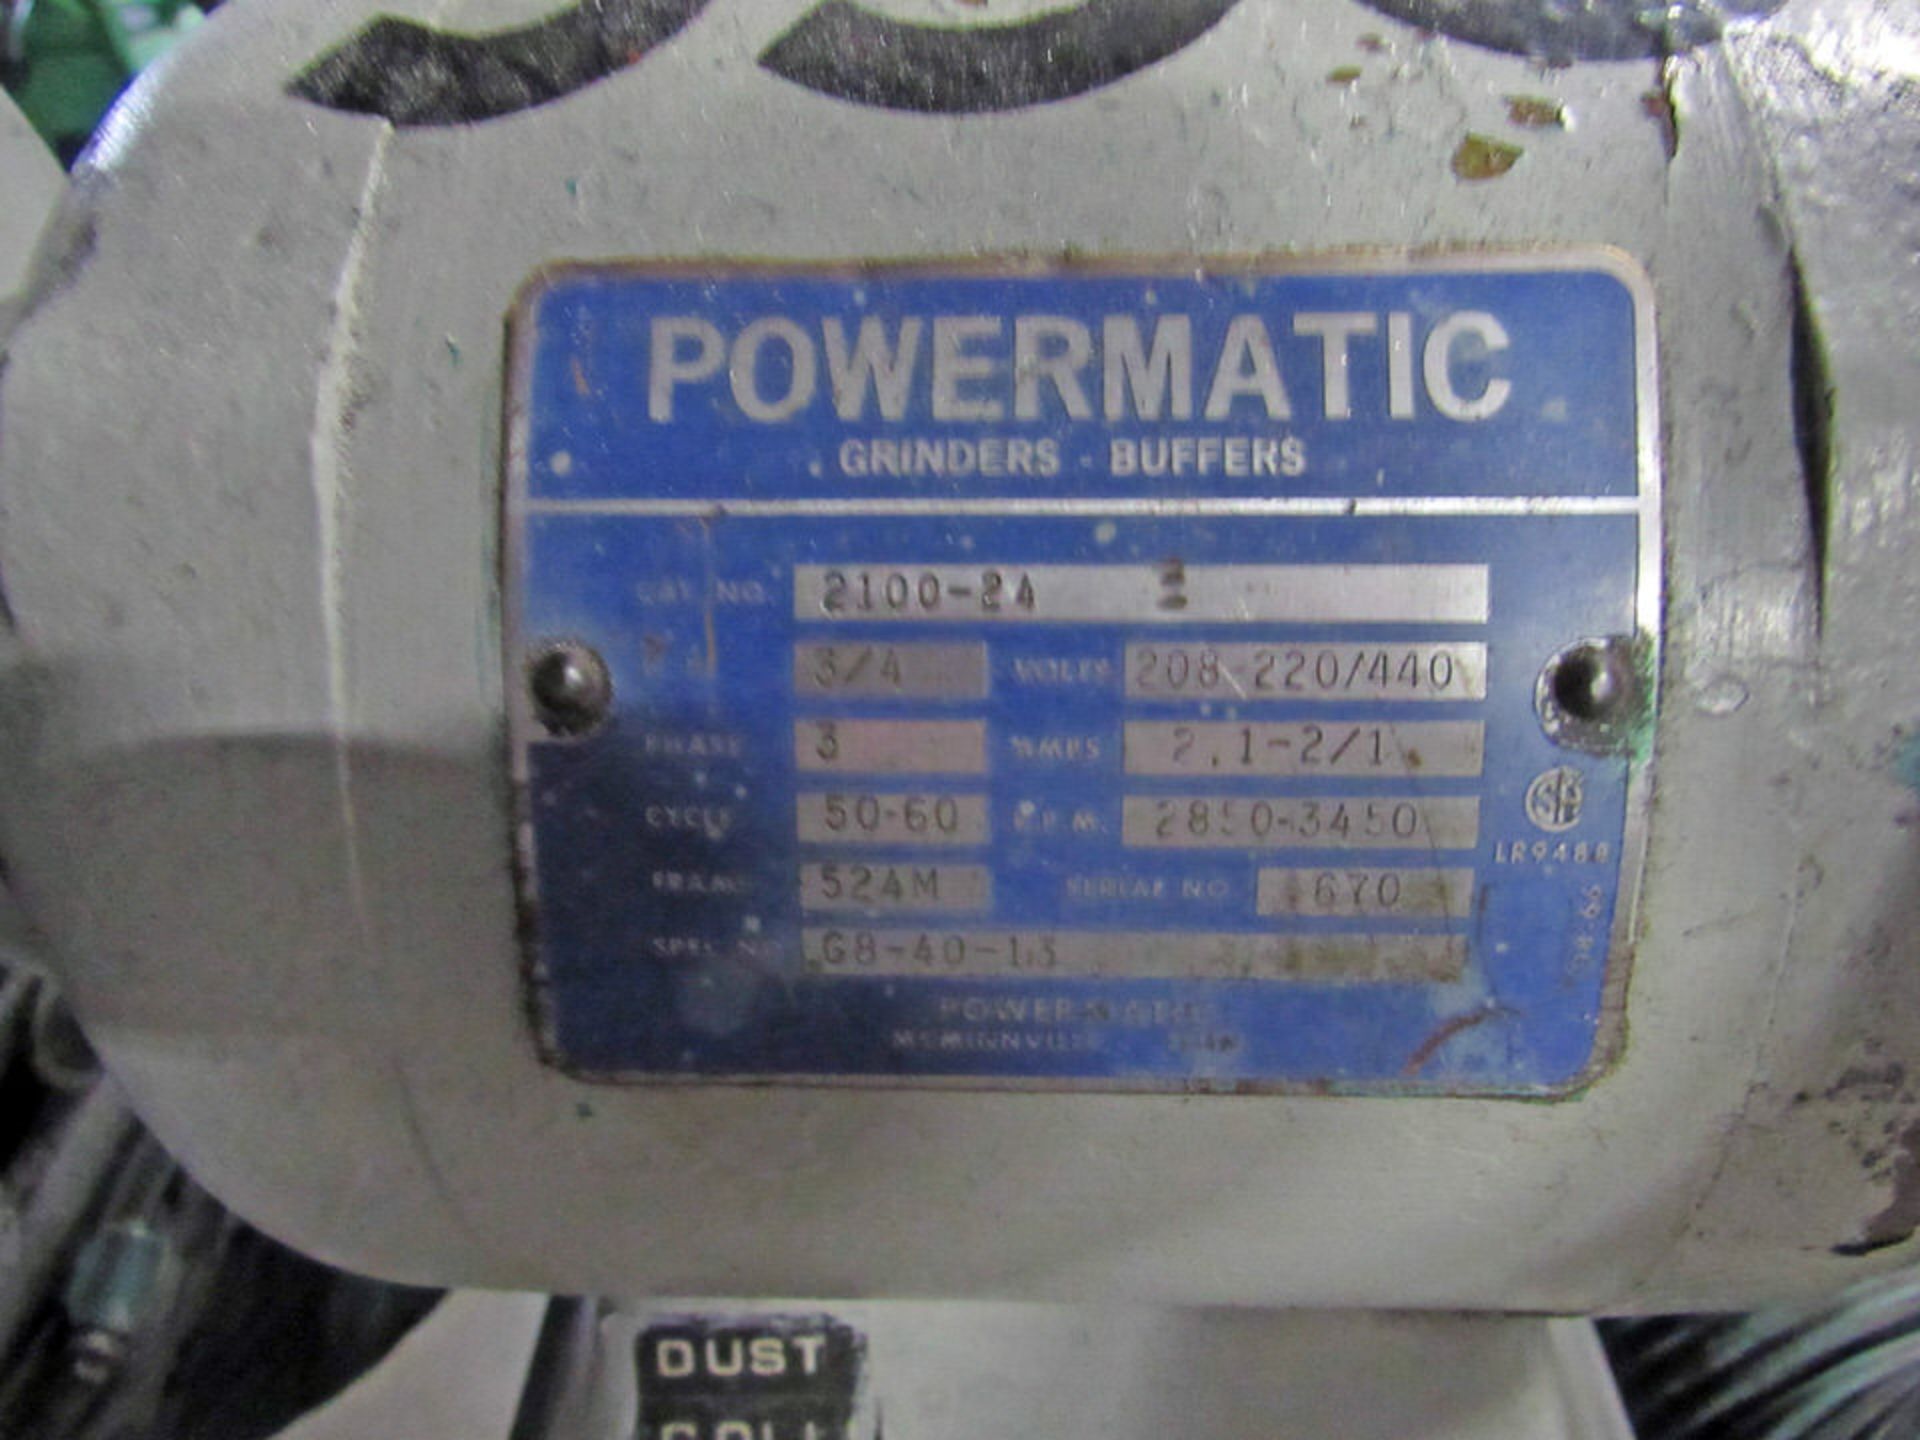 Powermatic Model 66 Bench Grinder with Torit Dust Collector, 3/4 hp motor, 5" dia. grinding wheel ( - Image 4 of 8